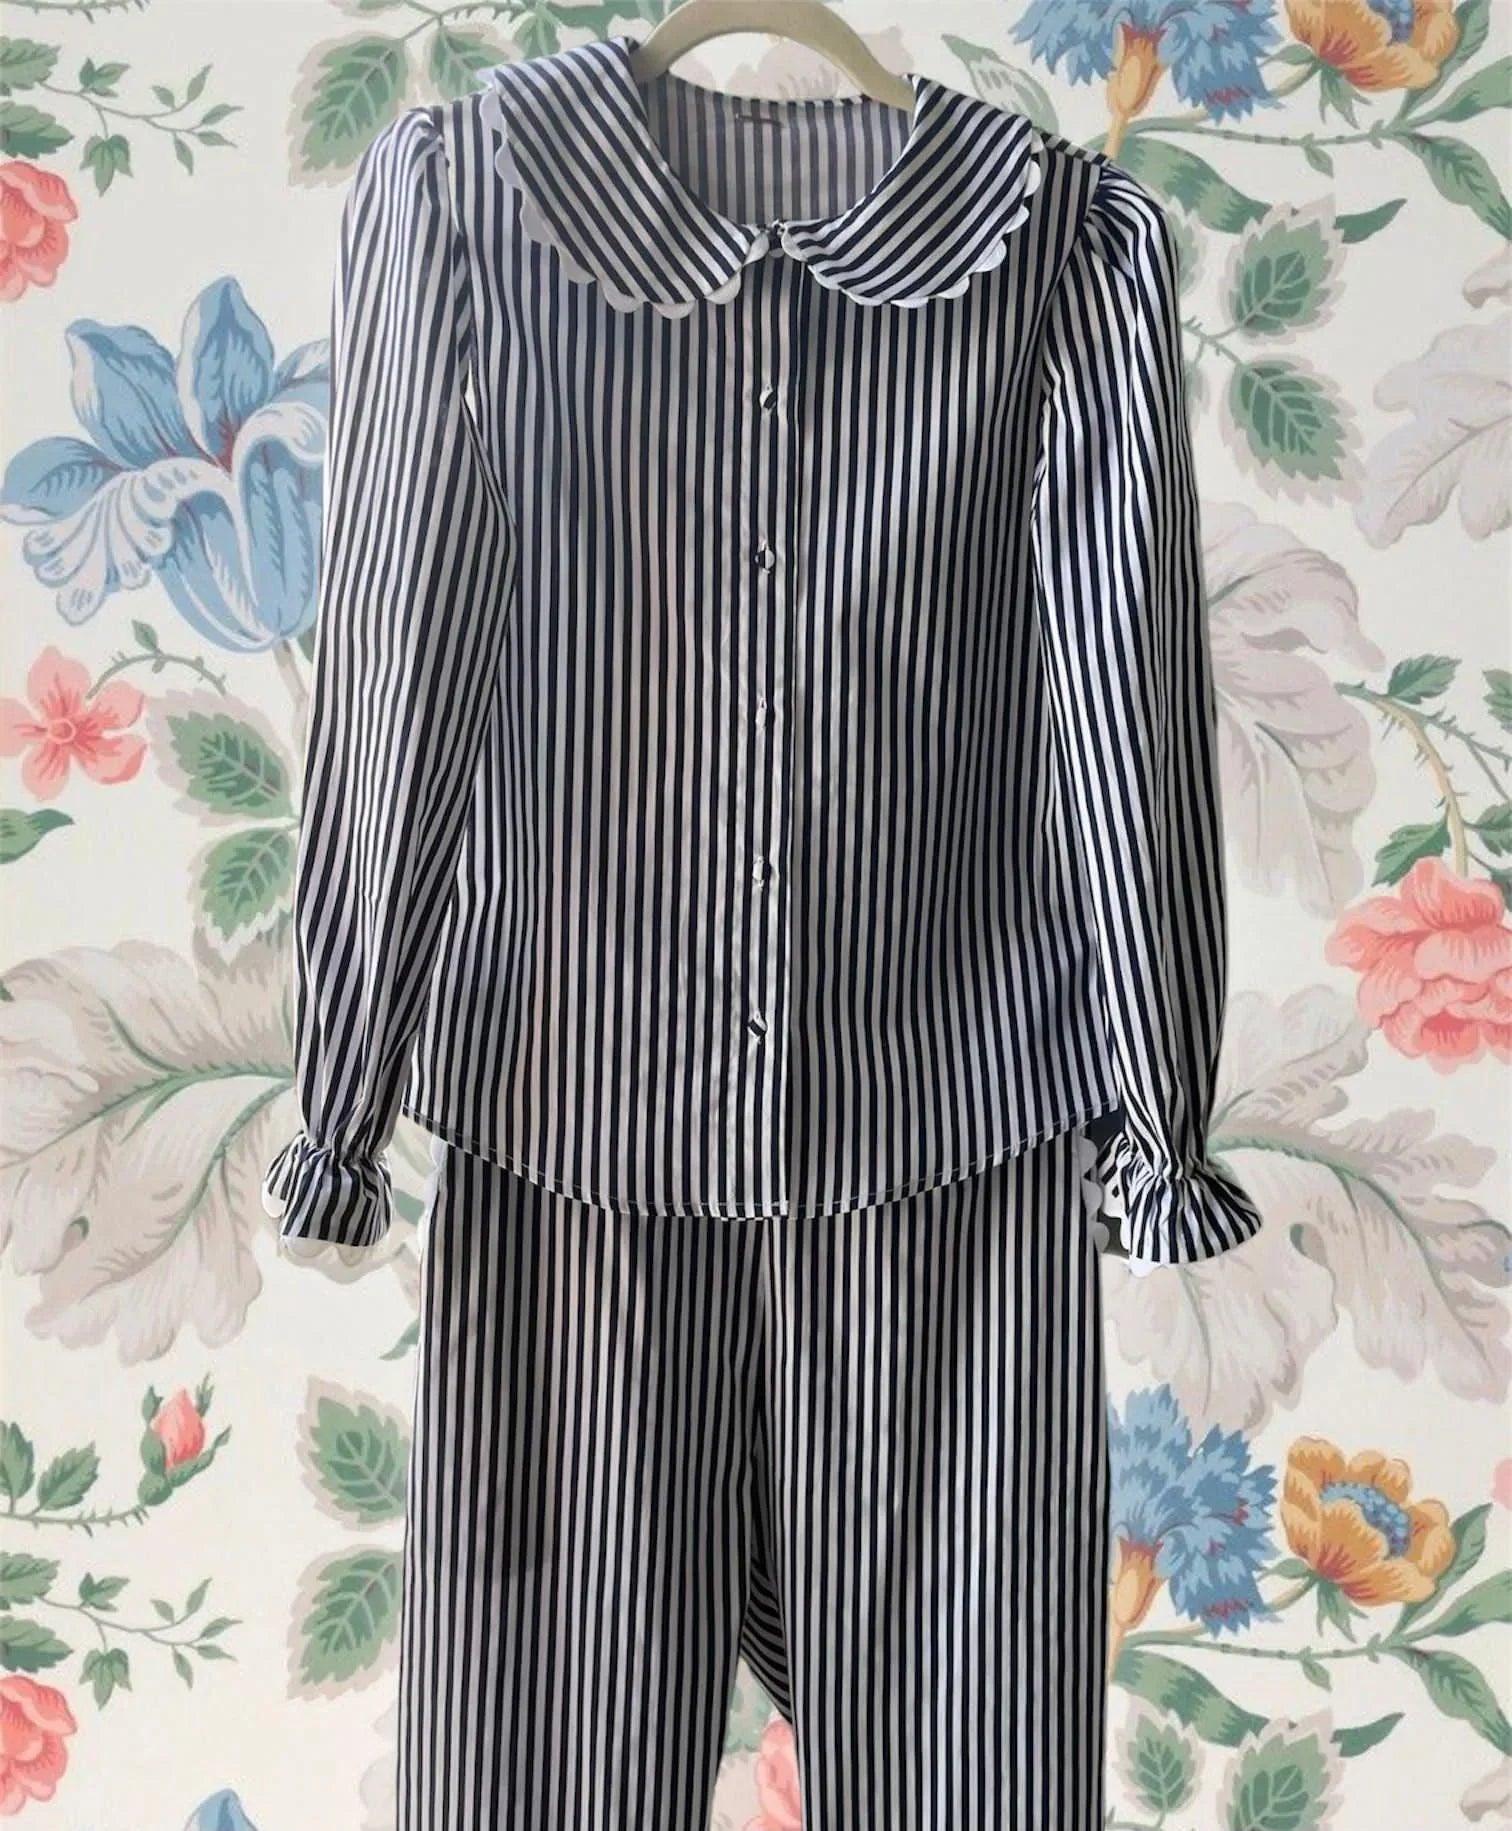 Prawn Cocktail (in & out) PJ set - navy blue stripes - Gingham Palace